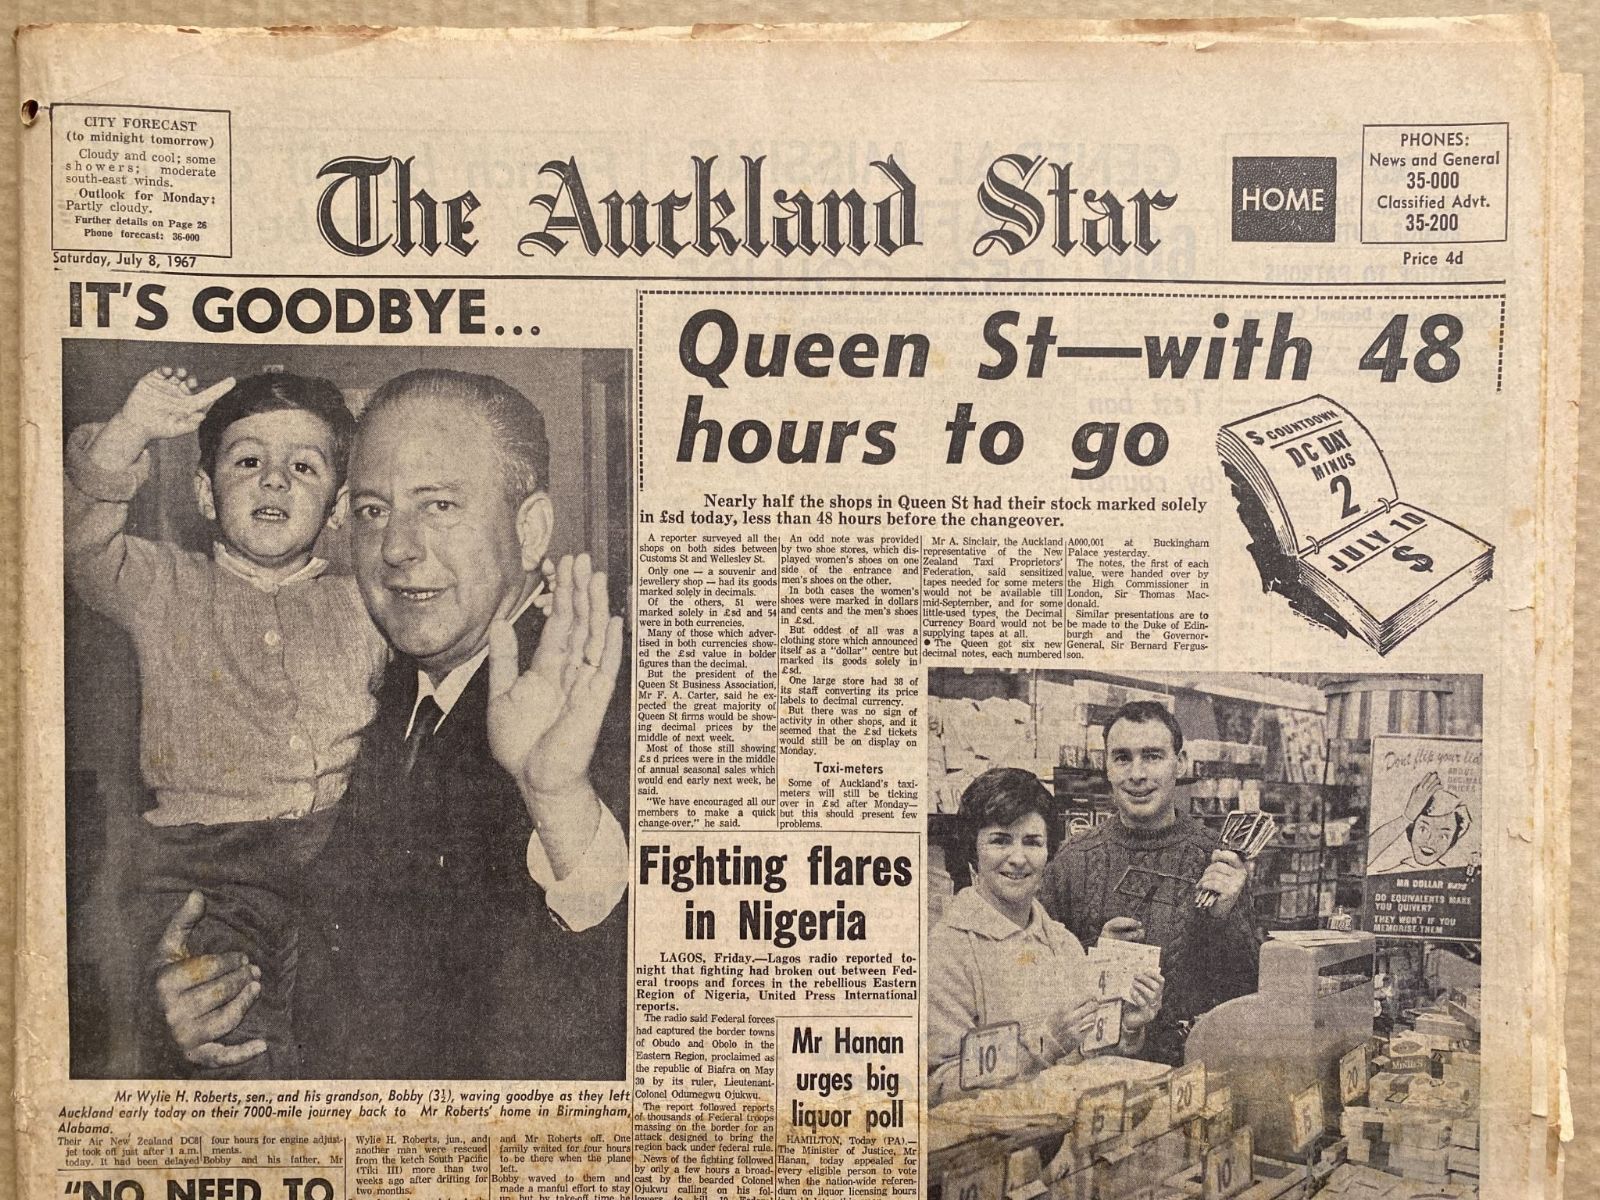 OLD NEWSPAPER: The Auckland Star, 8 July 1967 - Decimal currency changeover